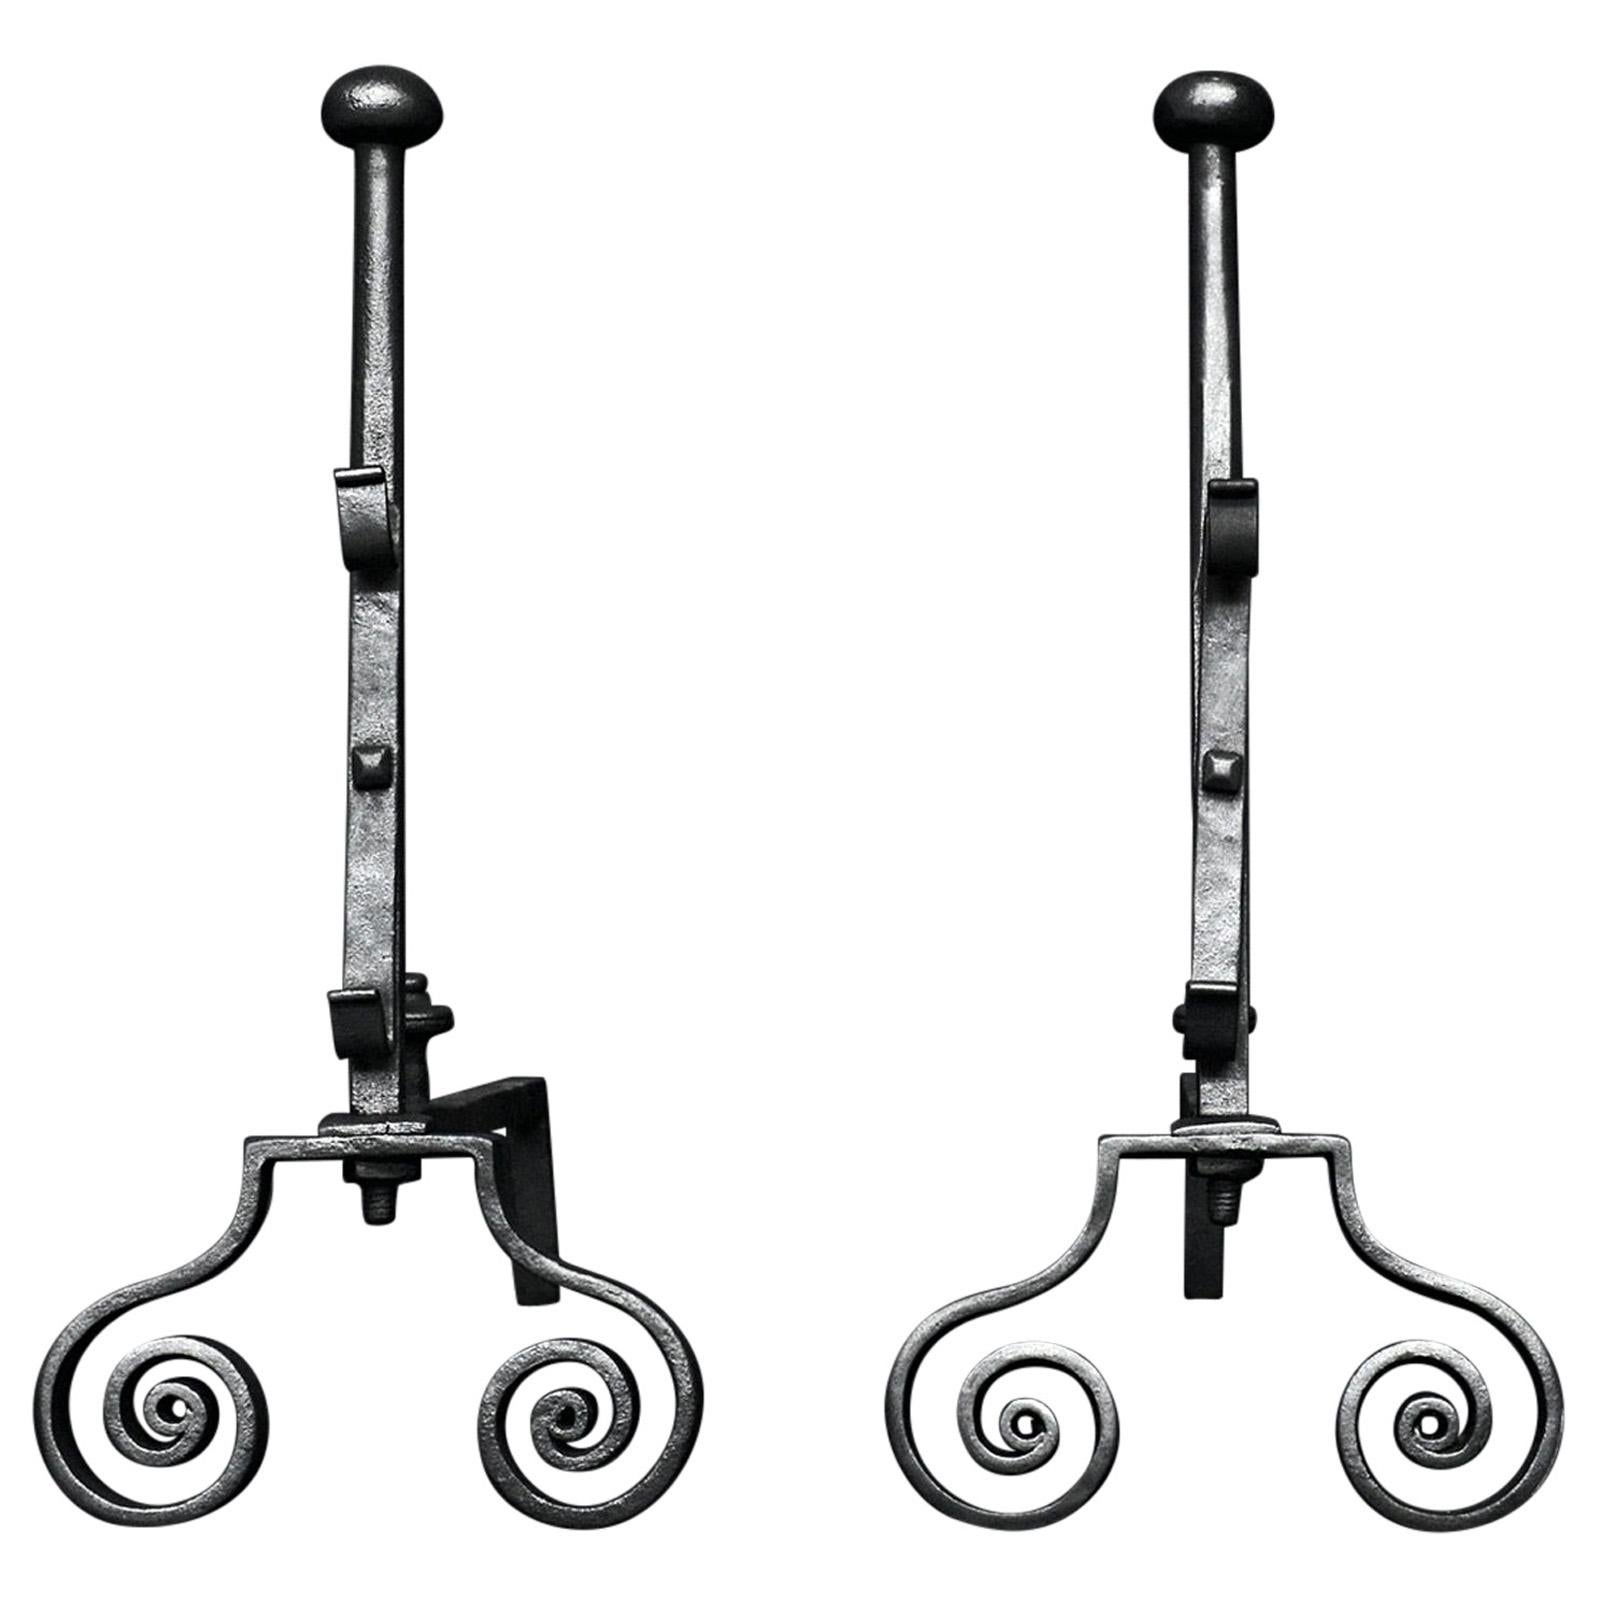 Pair of Wrought Iron Andirons For Sale